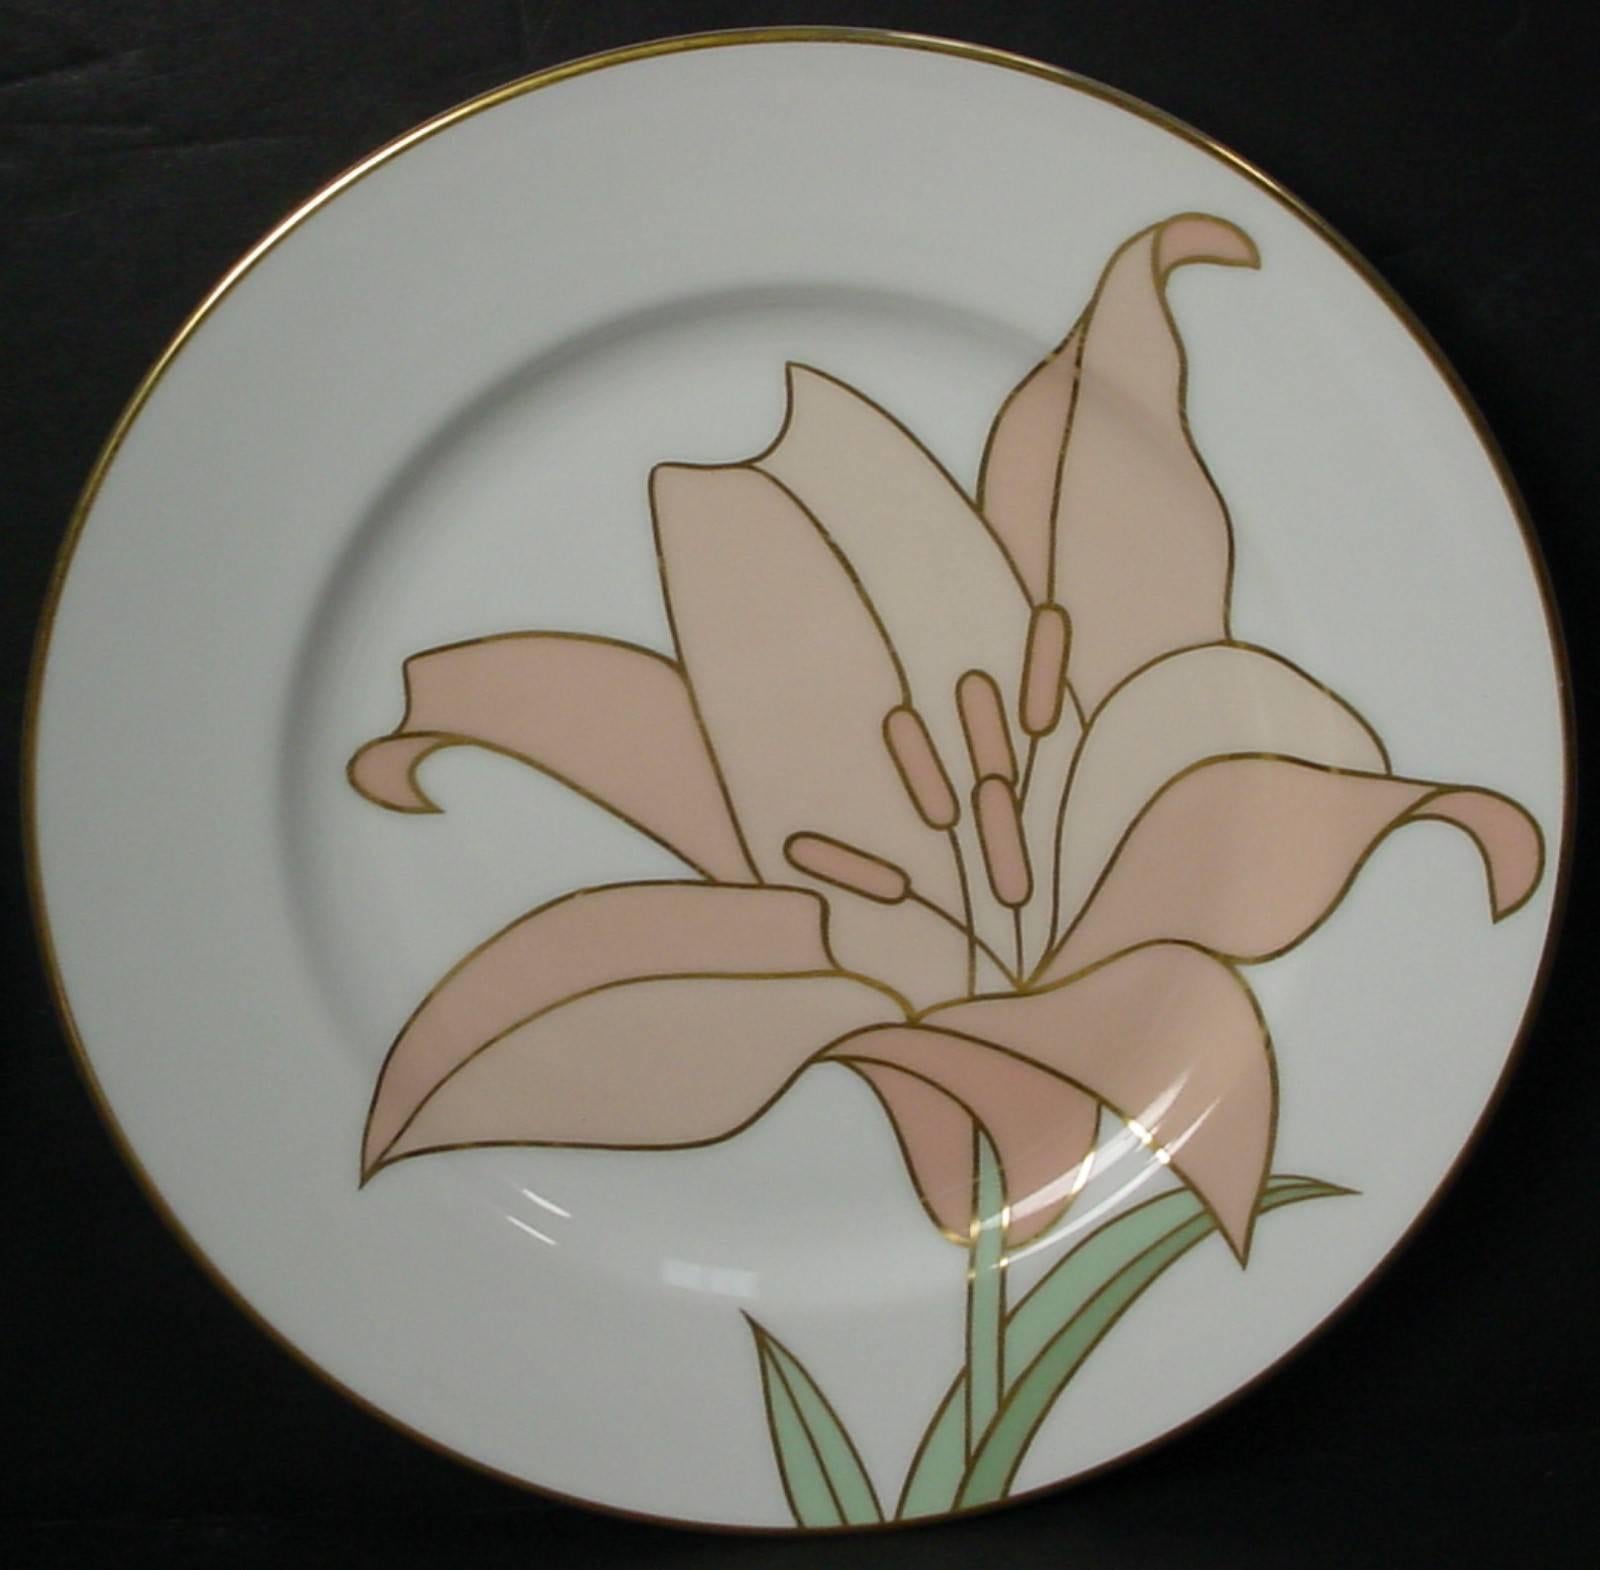 fitz and floyd china patterns